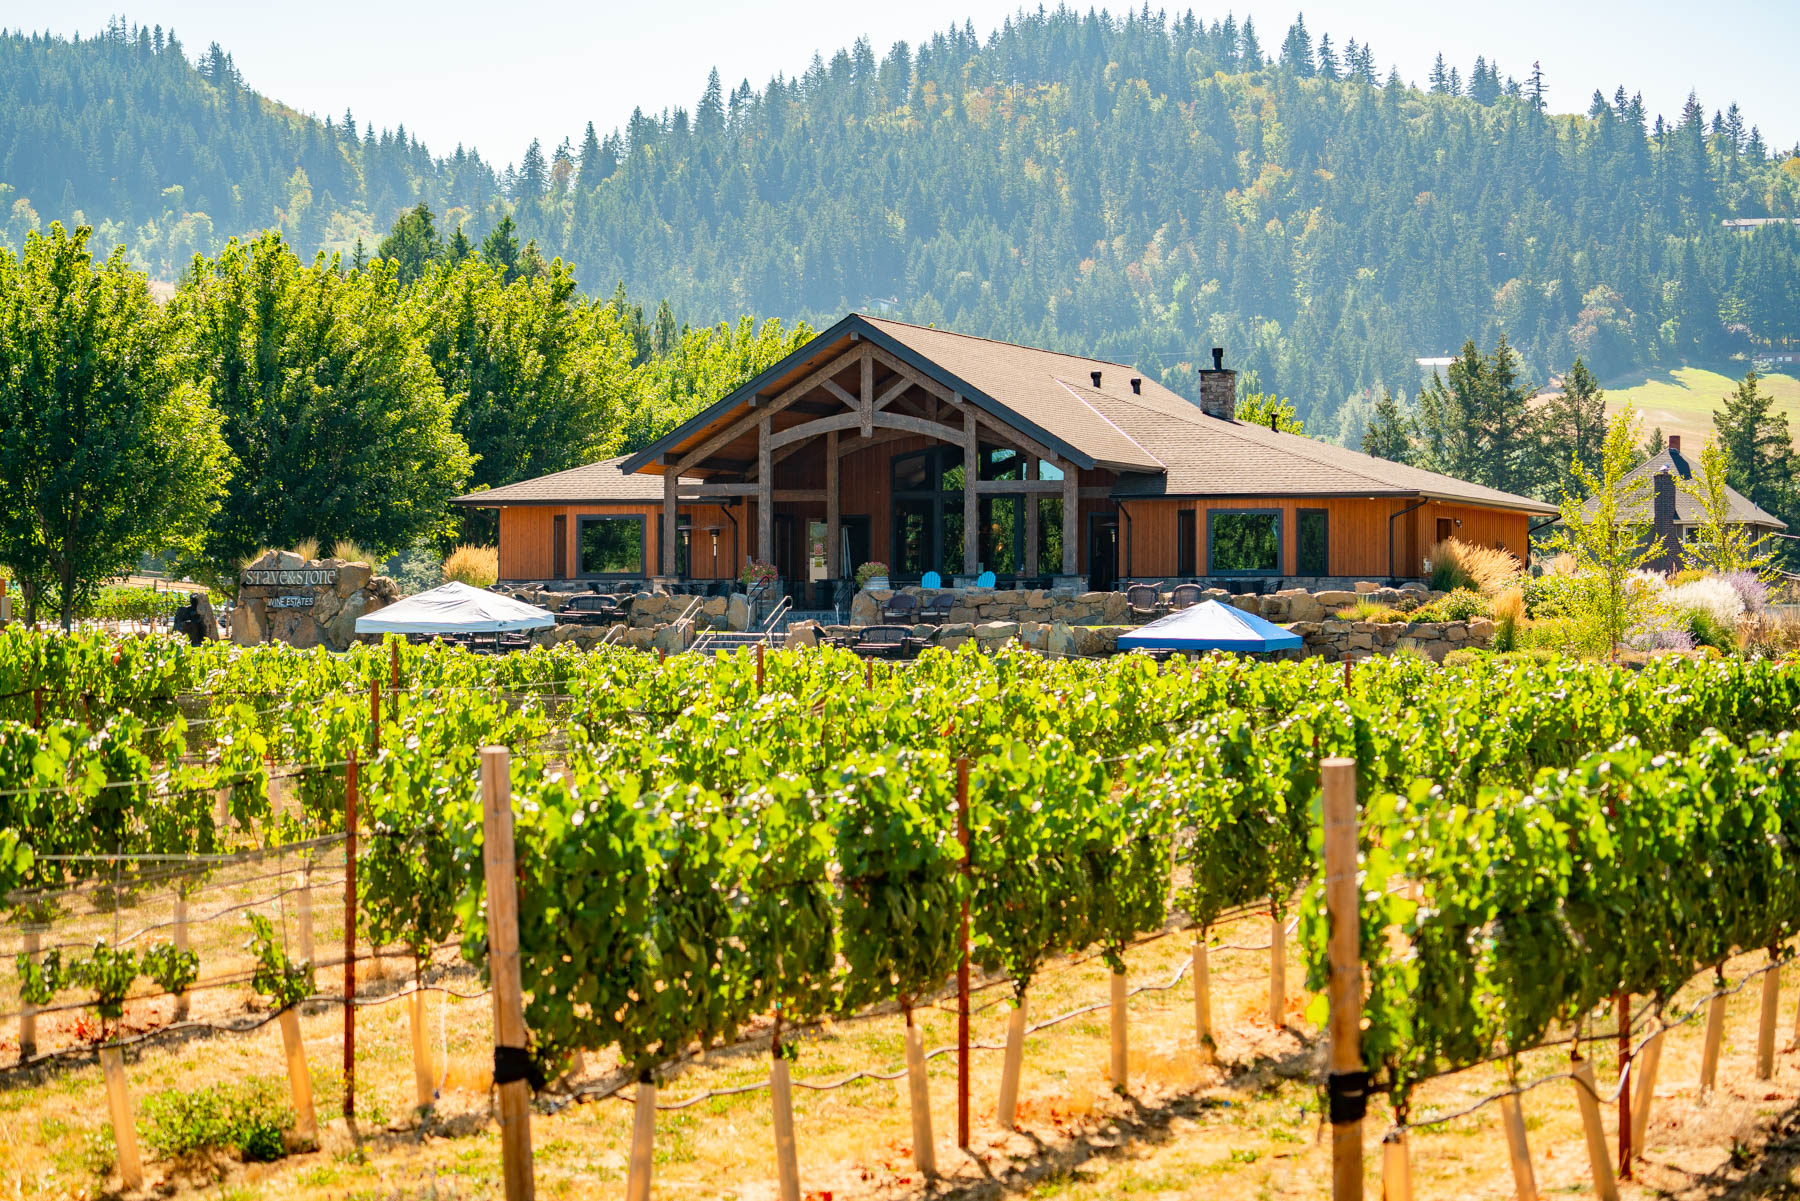 Stave and Stone Winery
best wineries Columbia River Gorge
Best wineries Hood River Oregon